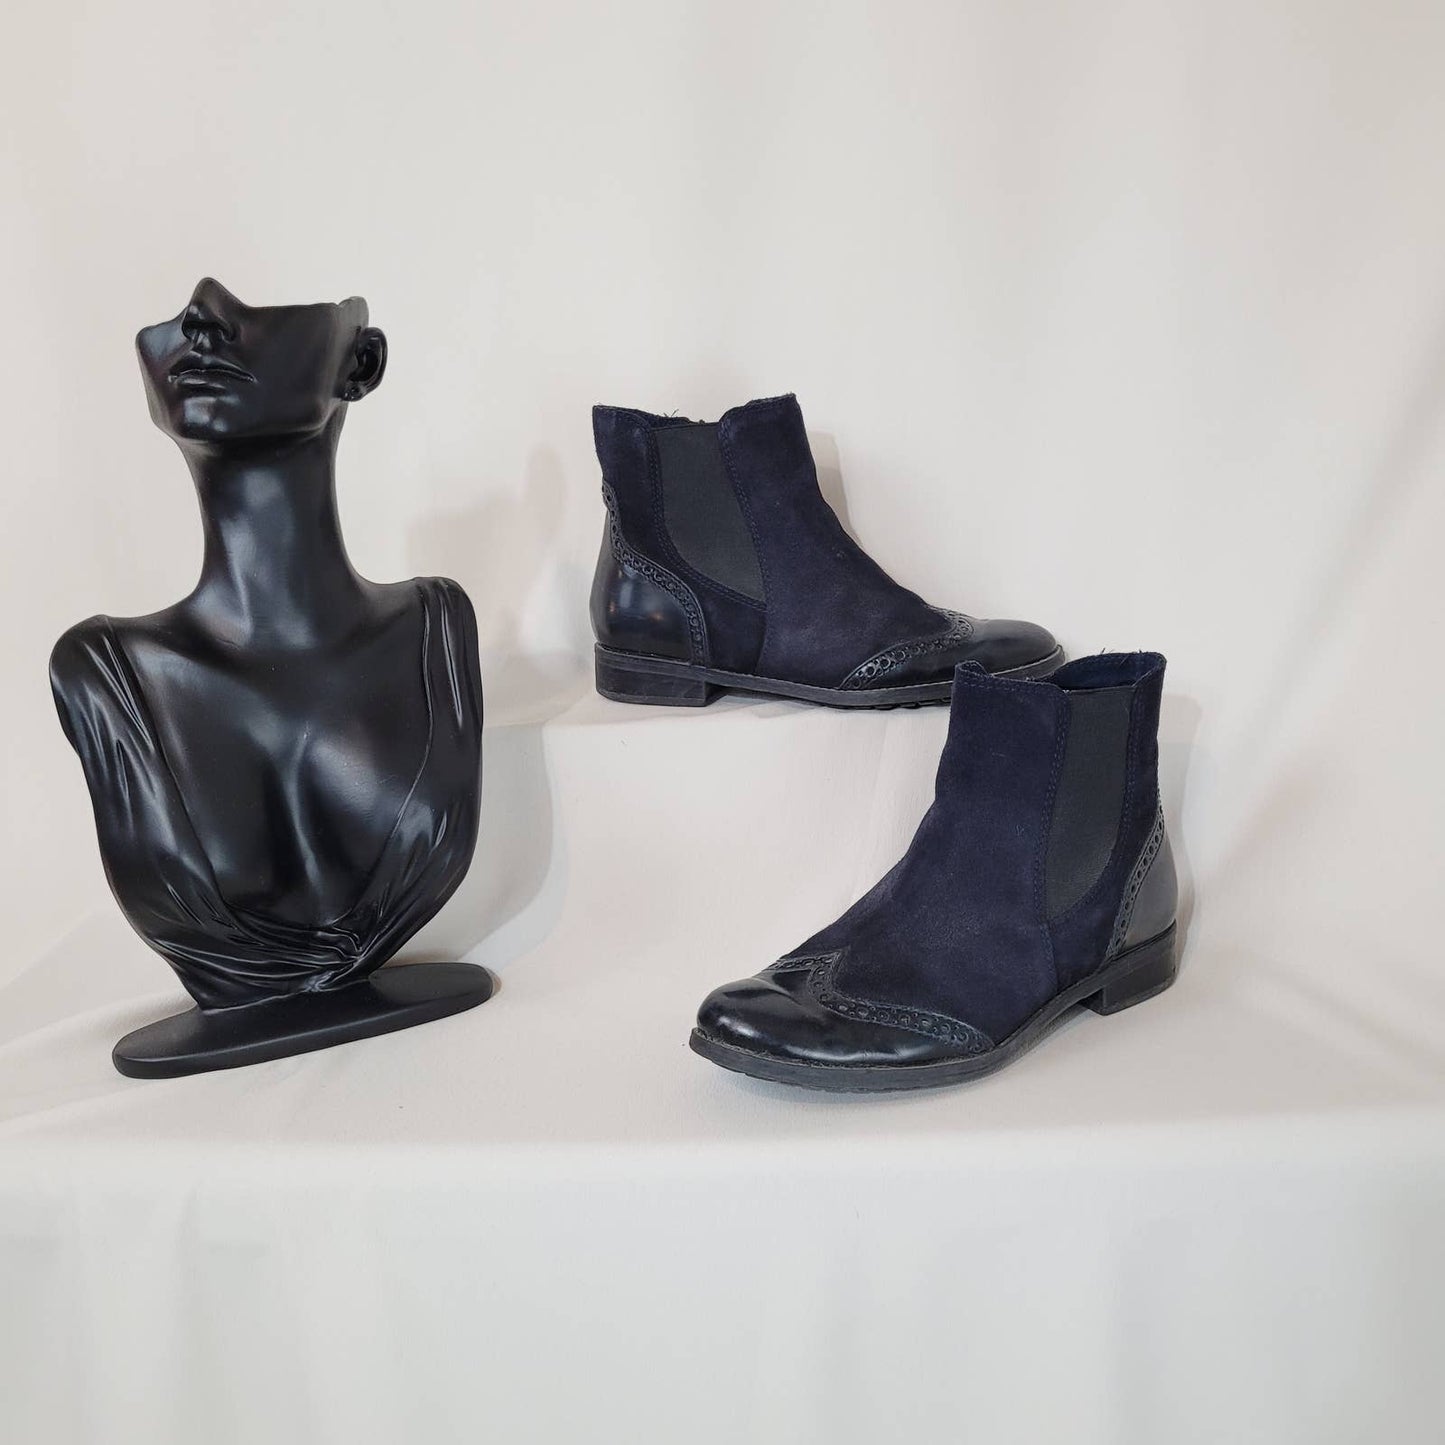 Ateliers Black Patent Leather & Suede Ankle Booties with Brogue Detailing - 37Markita's ClosetAteliers